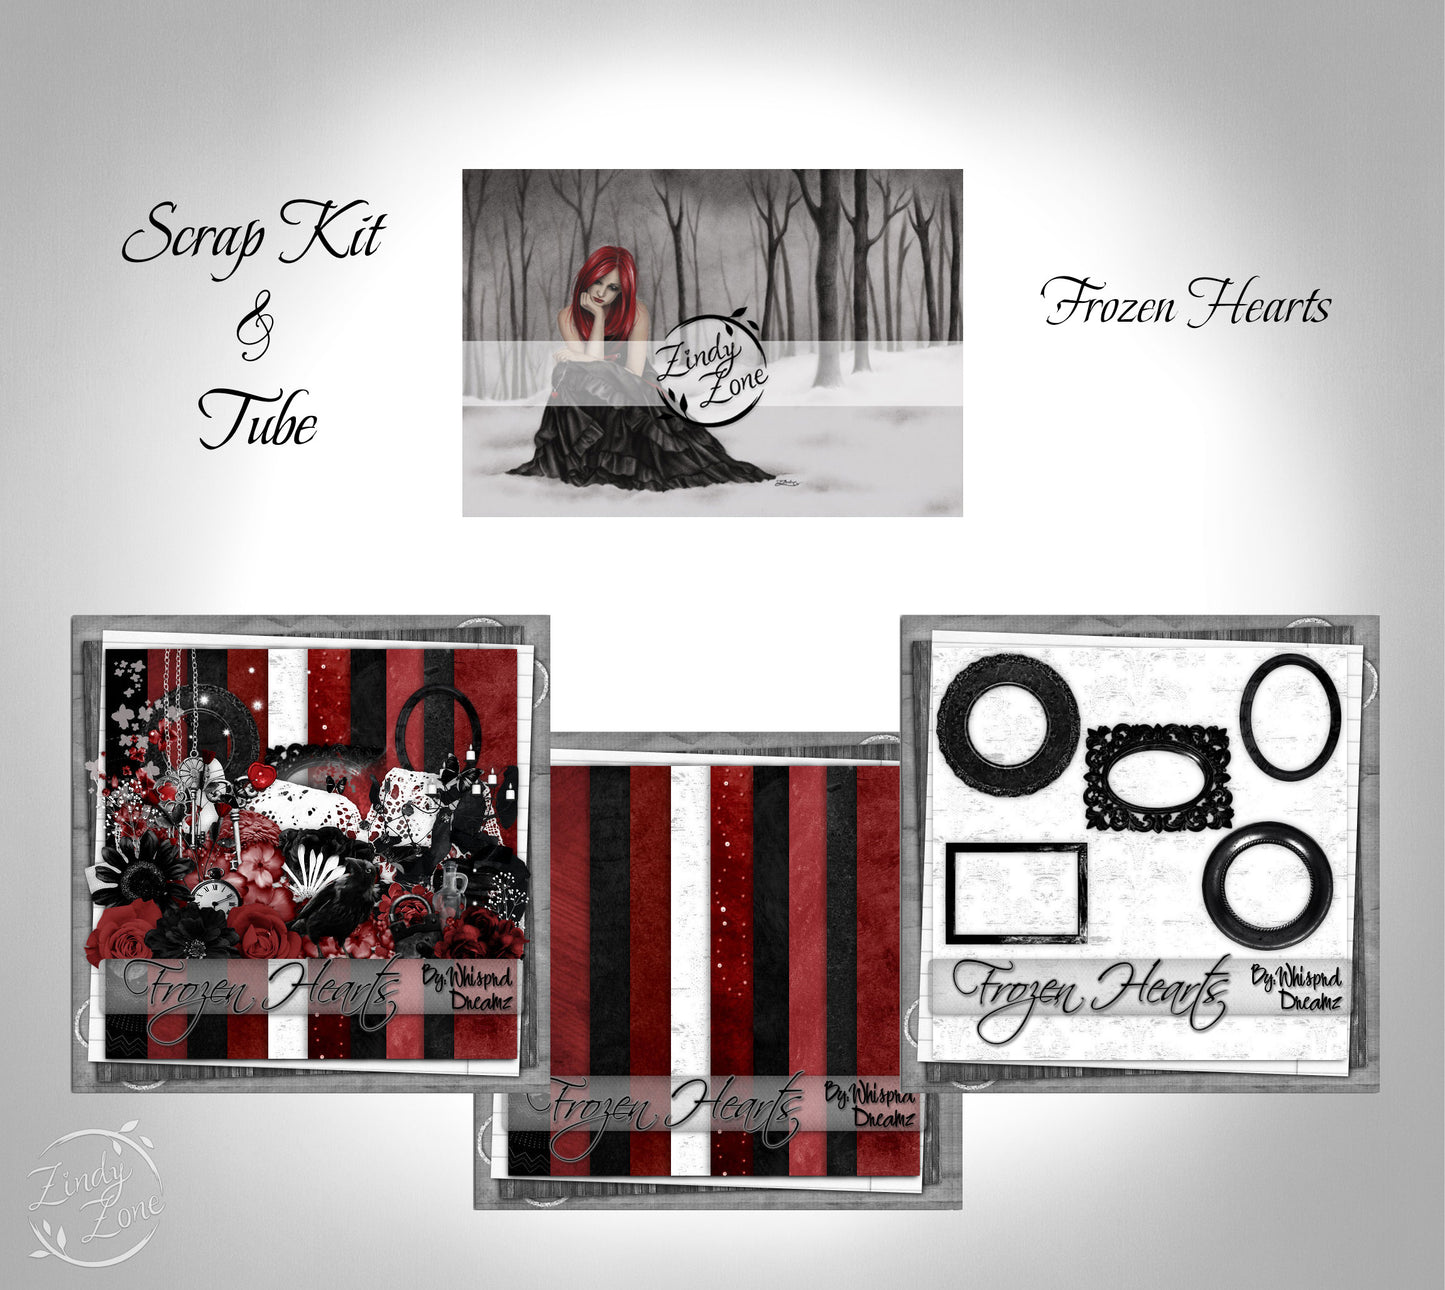 Frozen Hearts - Scrap Kit and Tube Pack